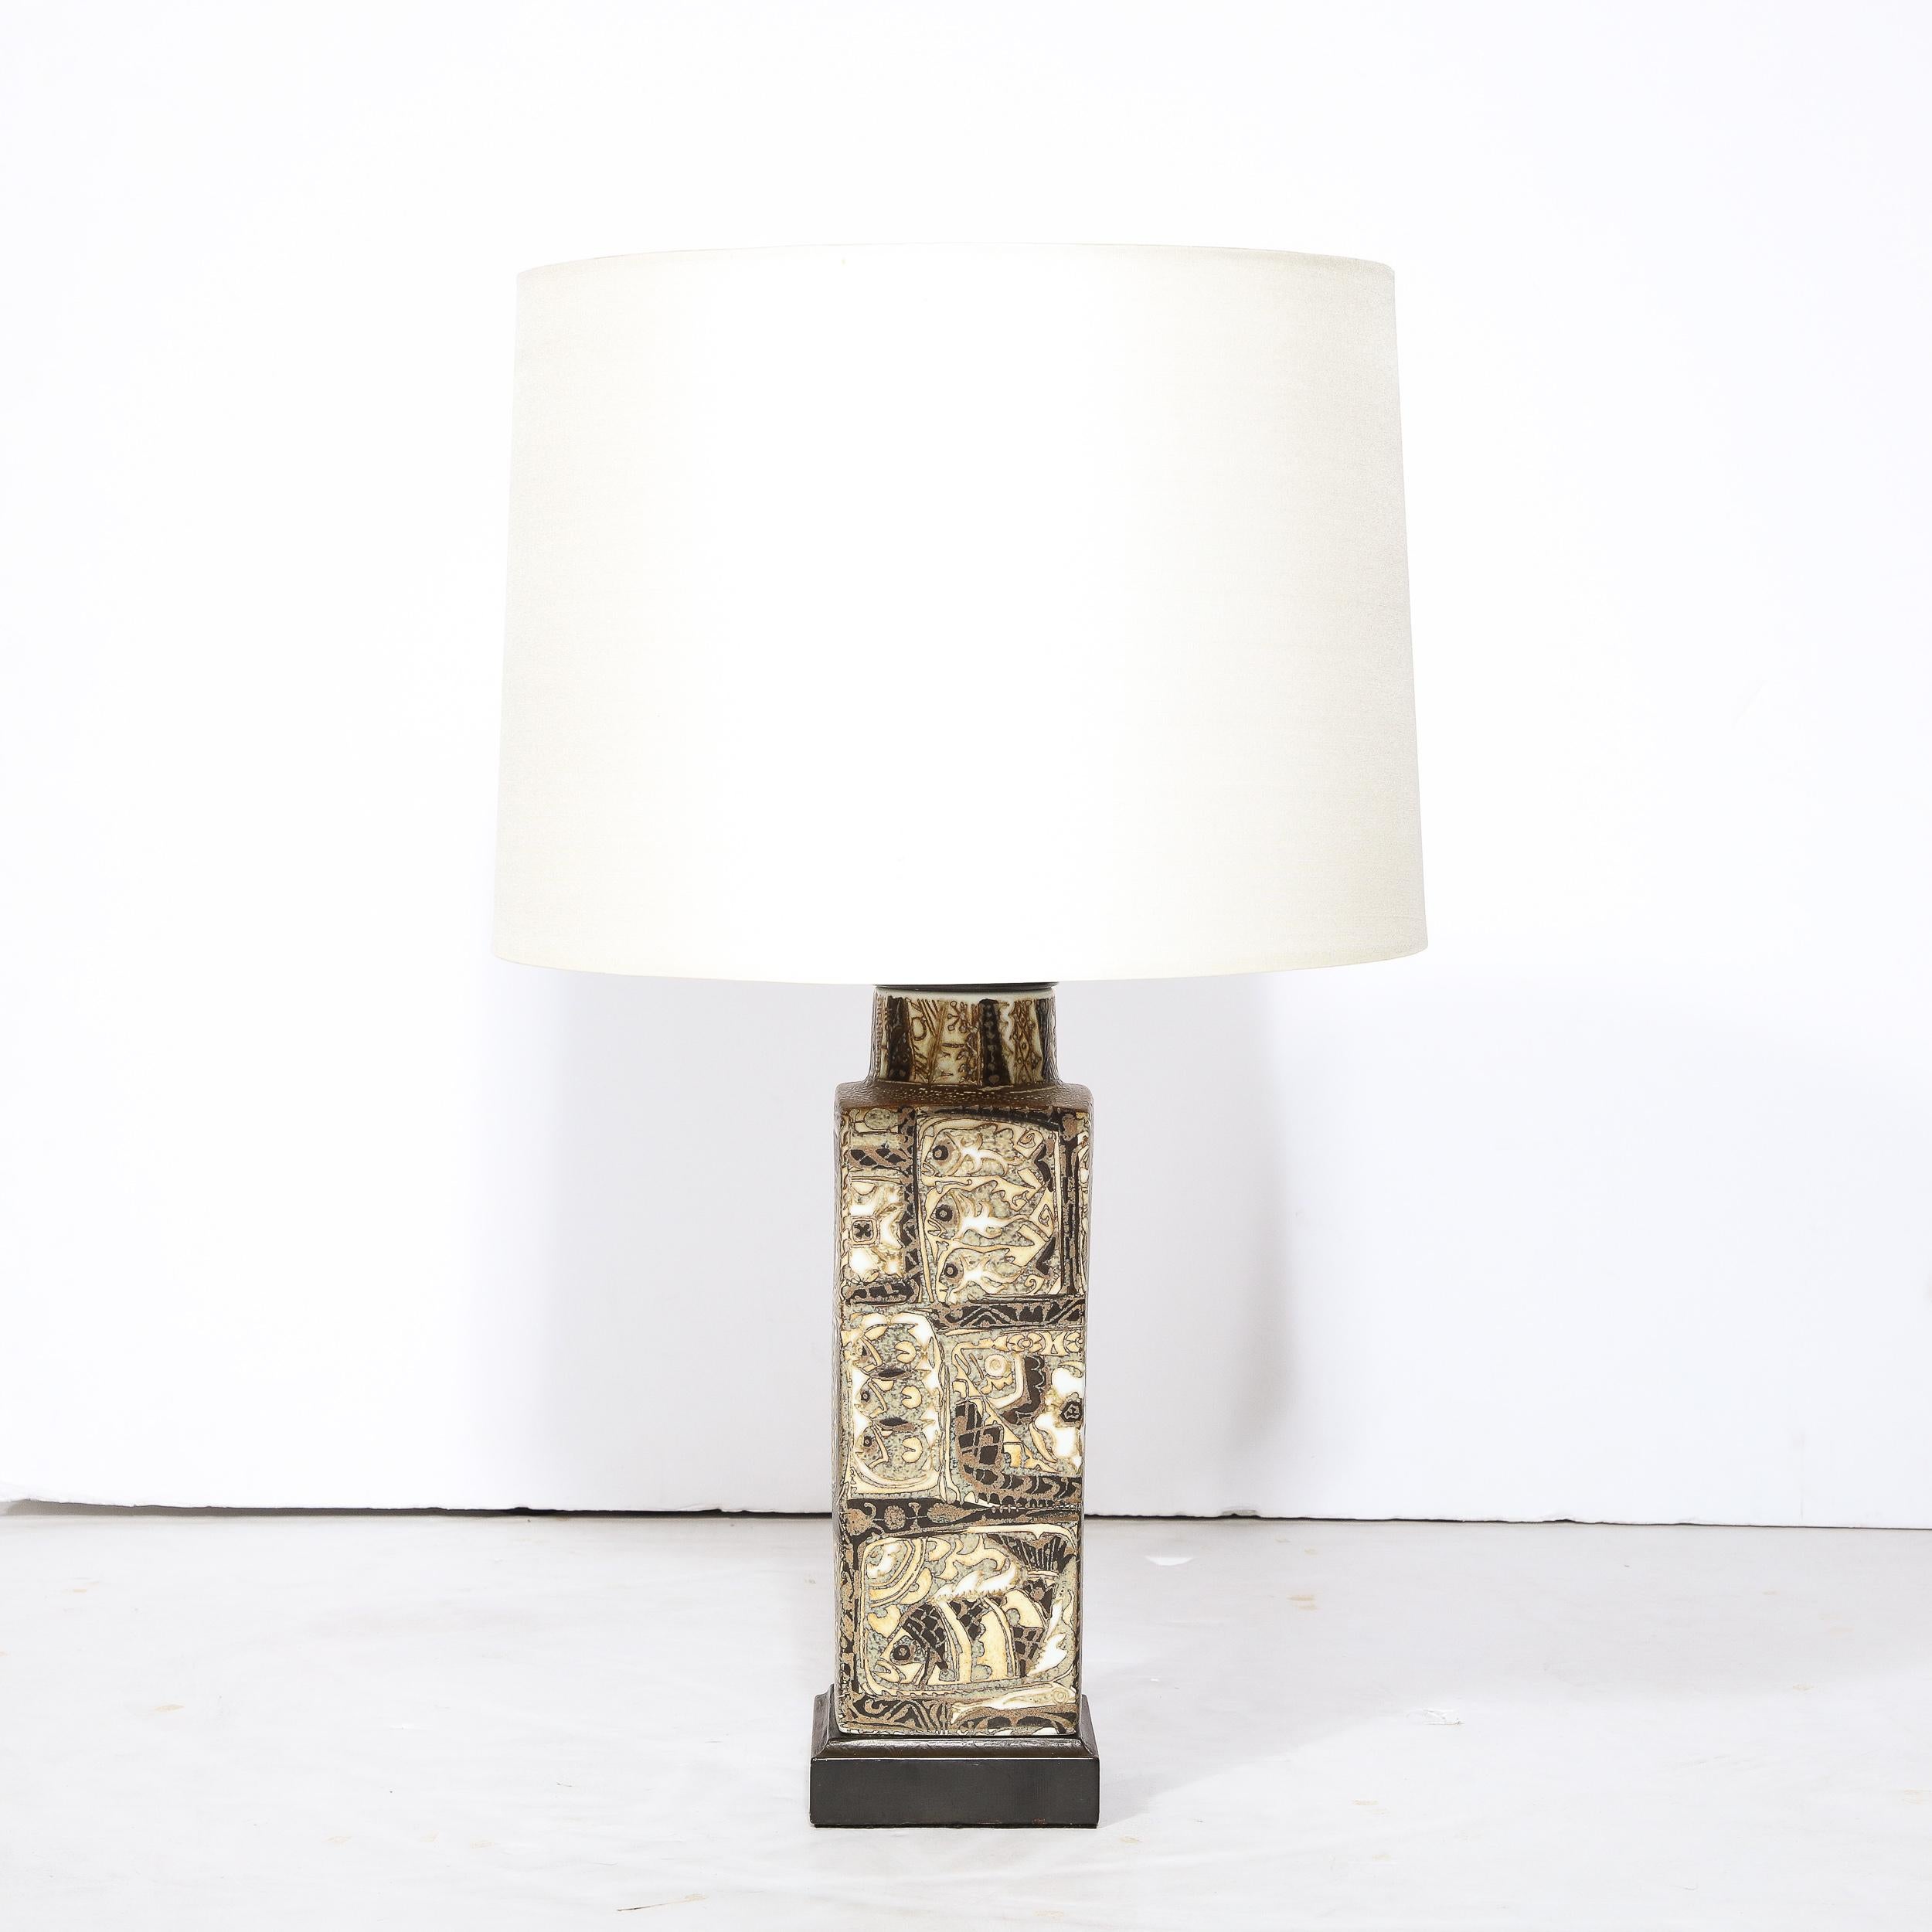 This refined Mid-Century Modern ceramic table lamp was realized by the illustrious studio of Royal Copenhagen in Denmark circa 1950. It features a square black enamel base that ascends into a rectilinear volumetric body and tapered neck. From a